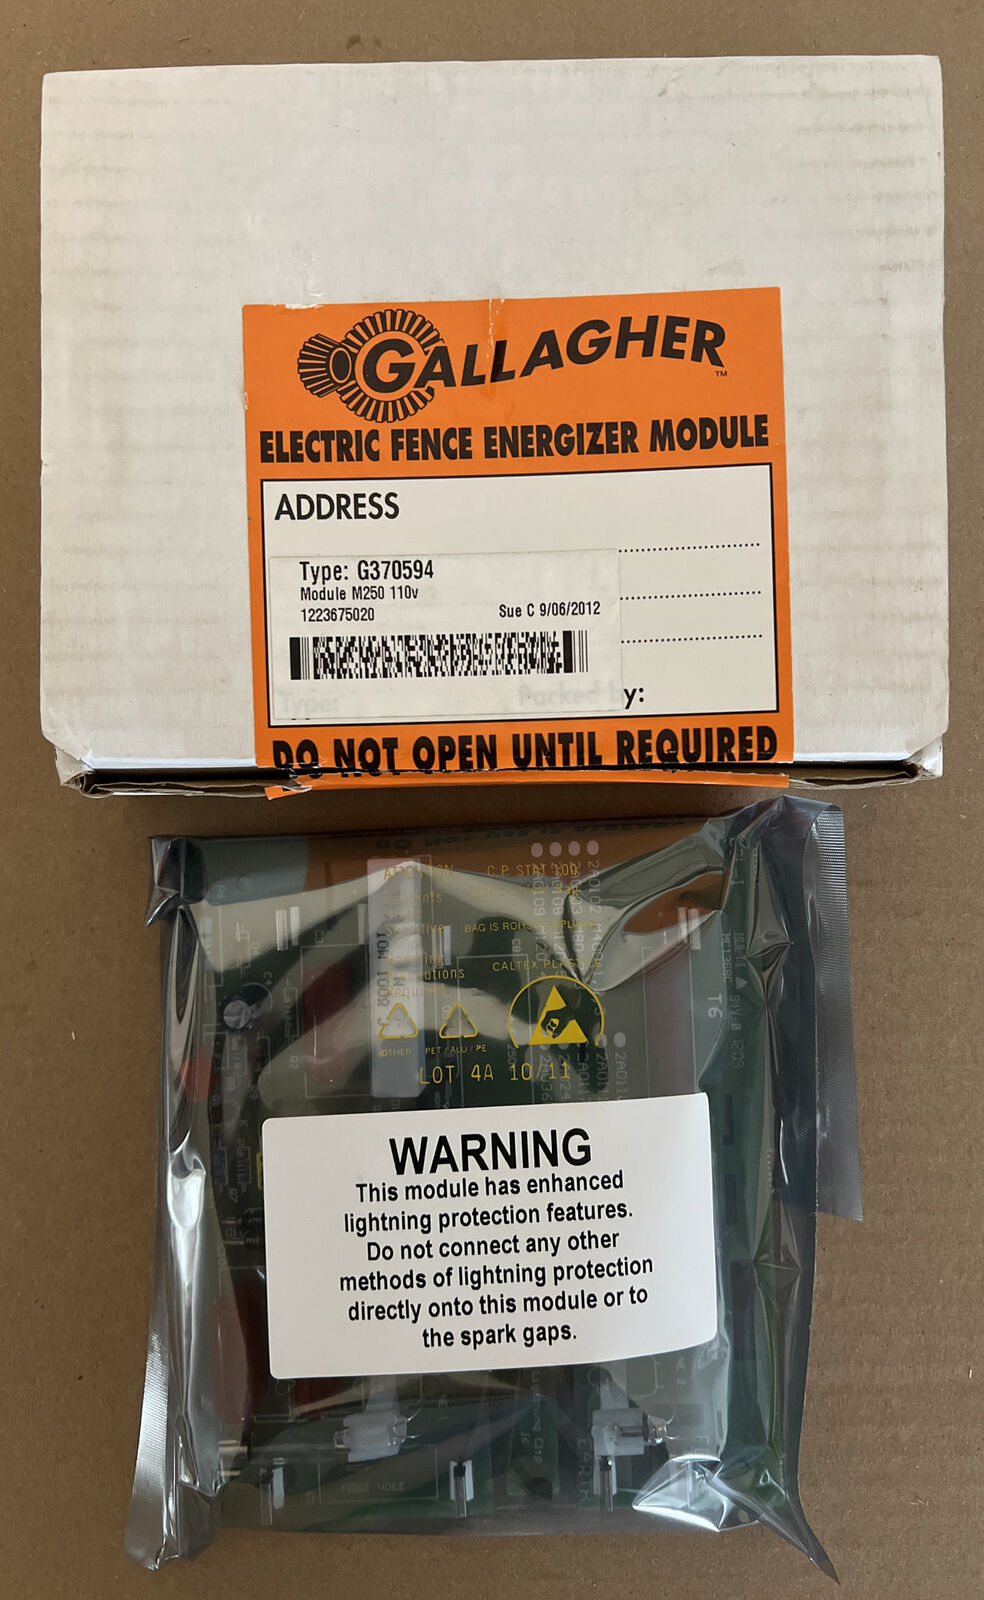 Gallagher G370594 Module M250 110v New Fence Repair Energizer